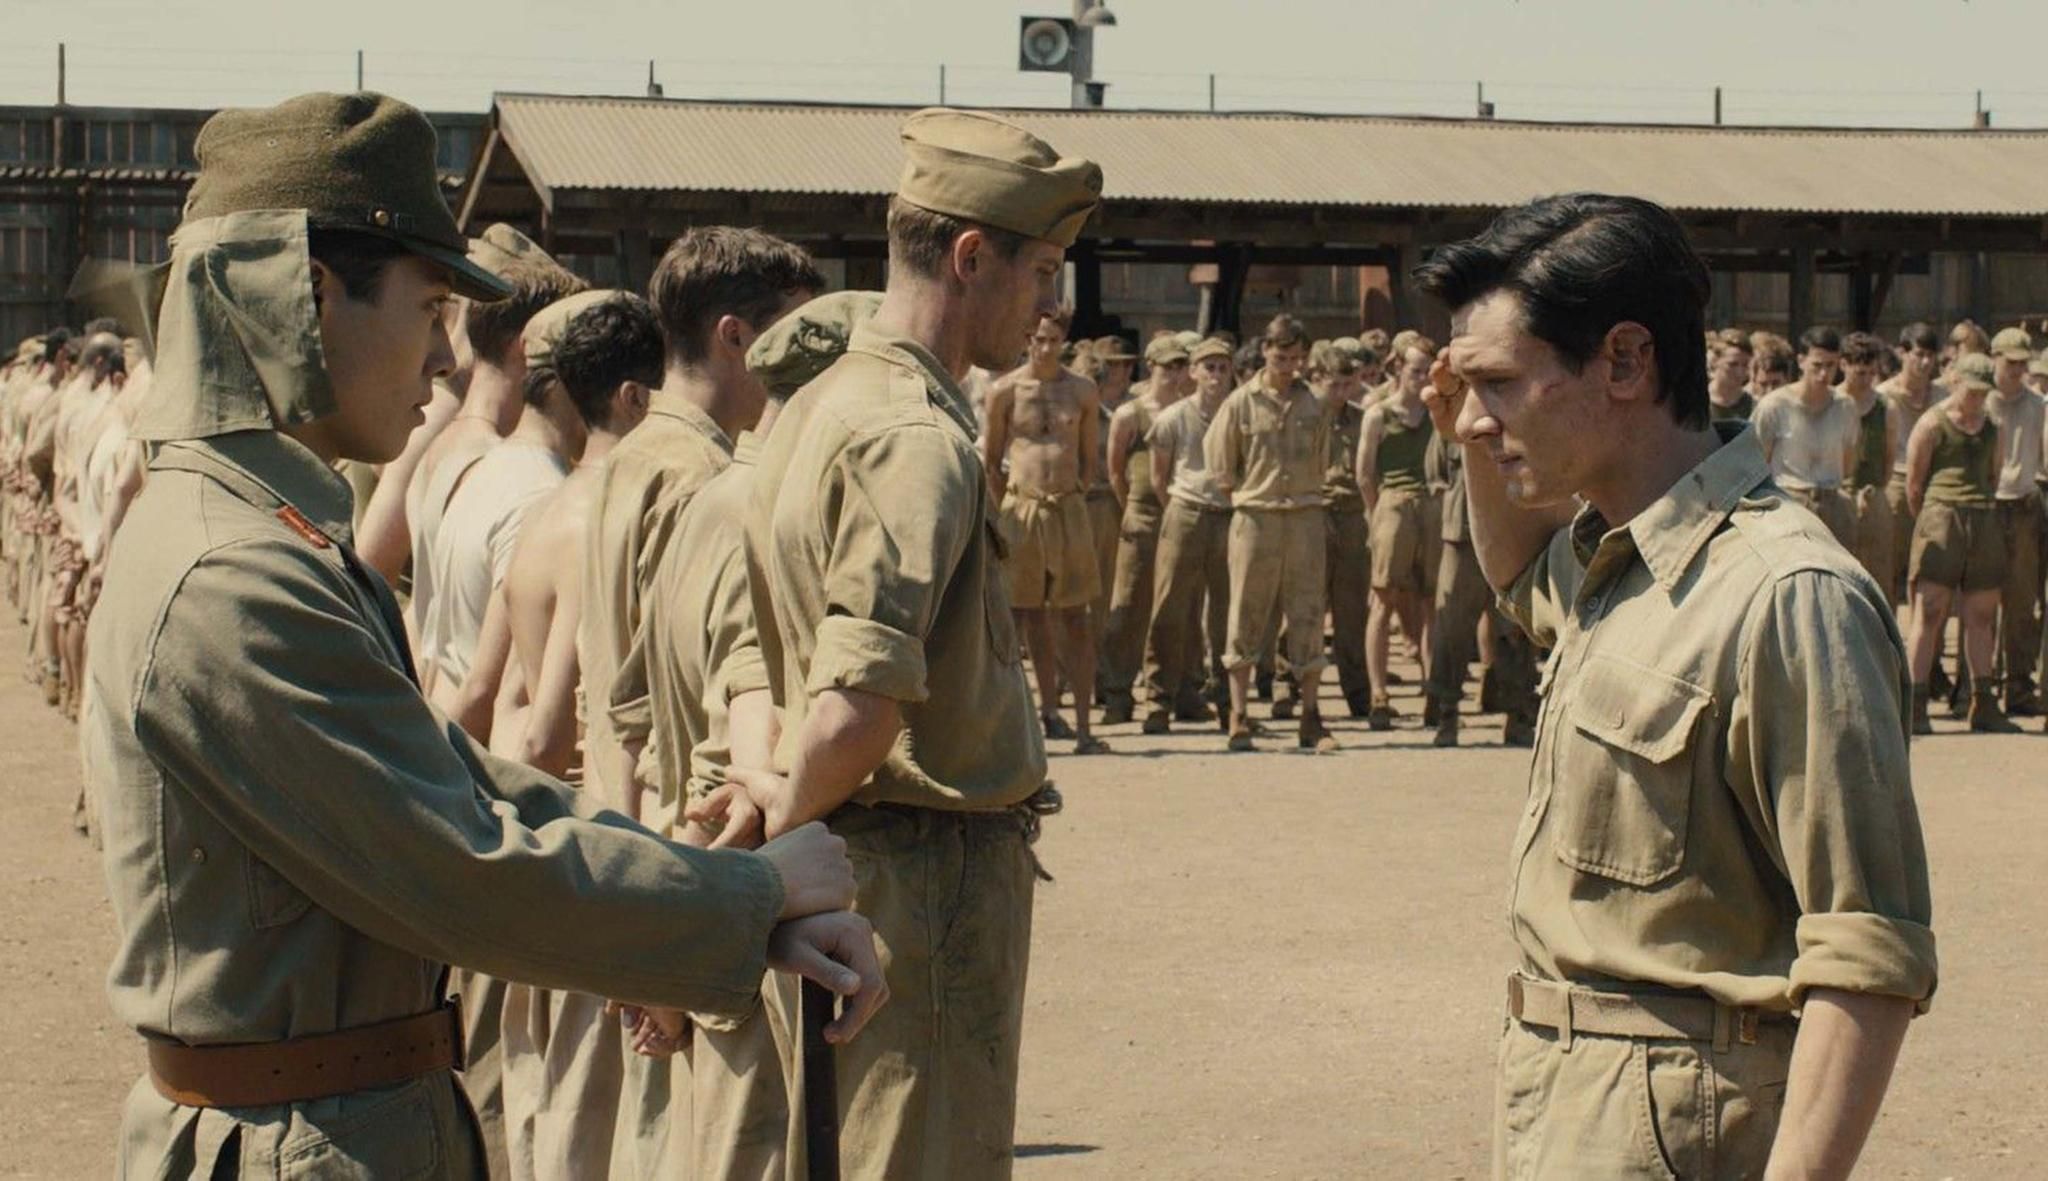 Unbroken': What Changes Were Made From The Best Selling Book?